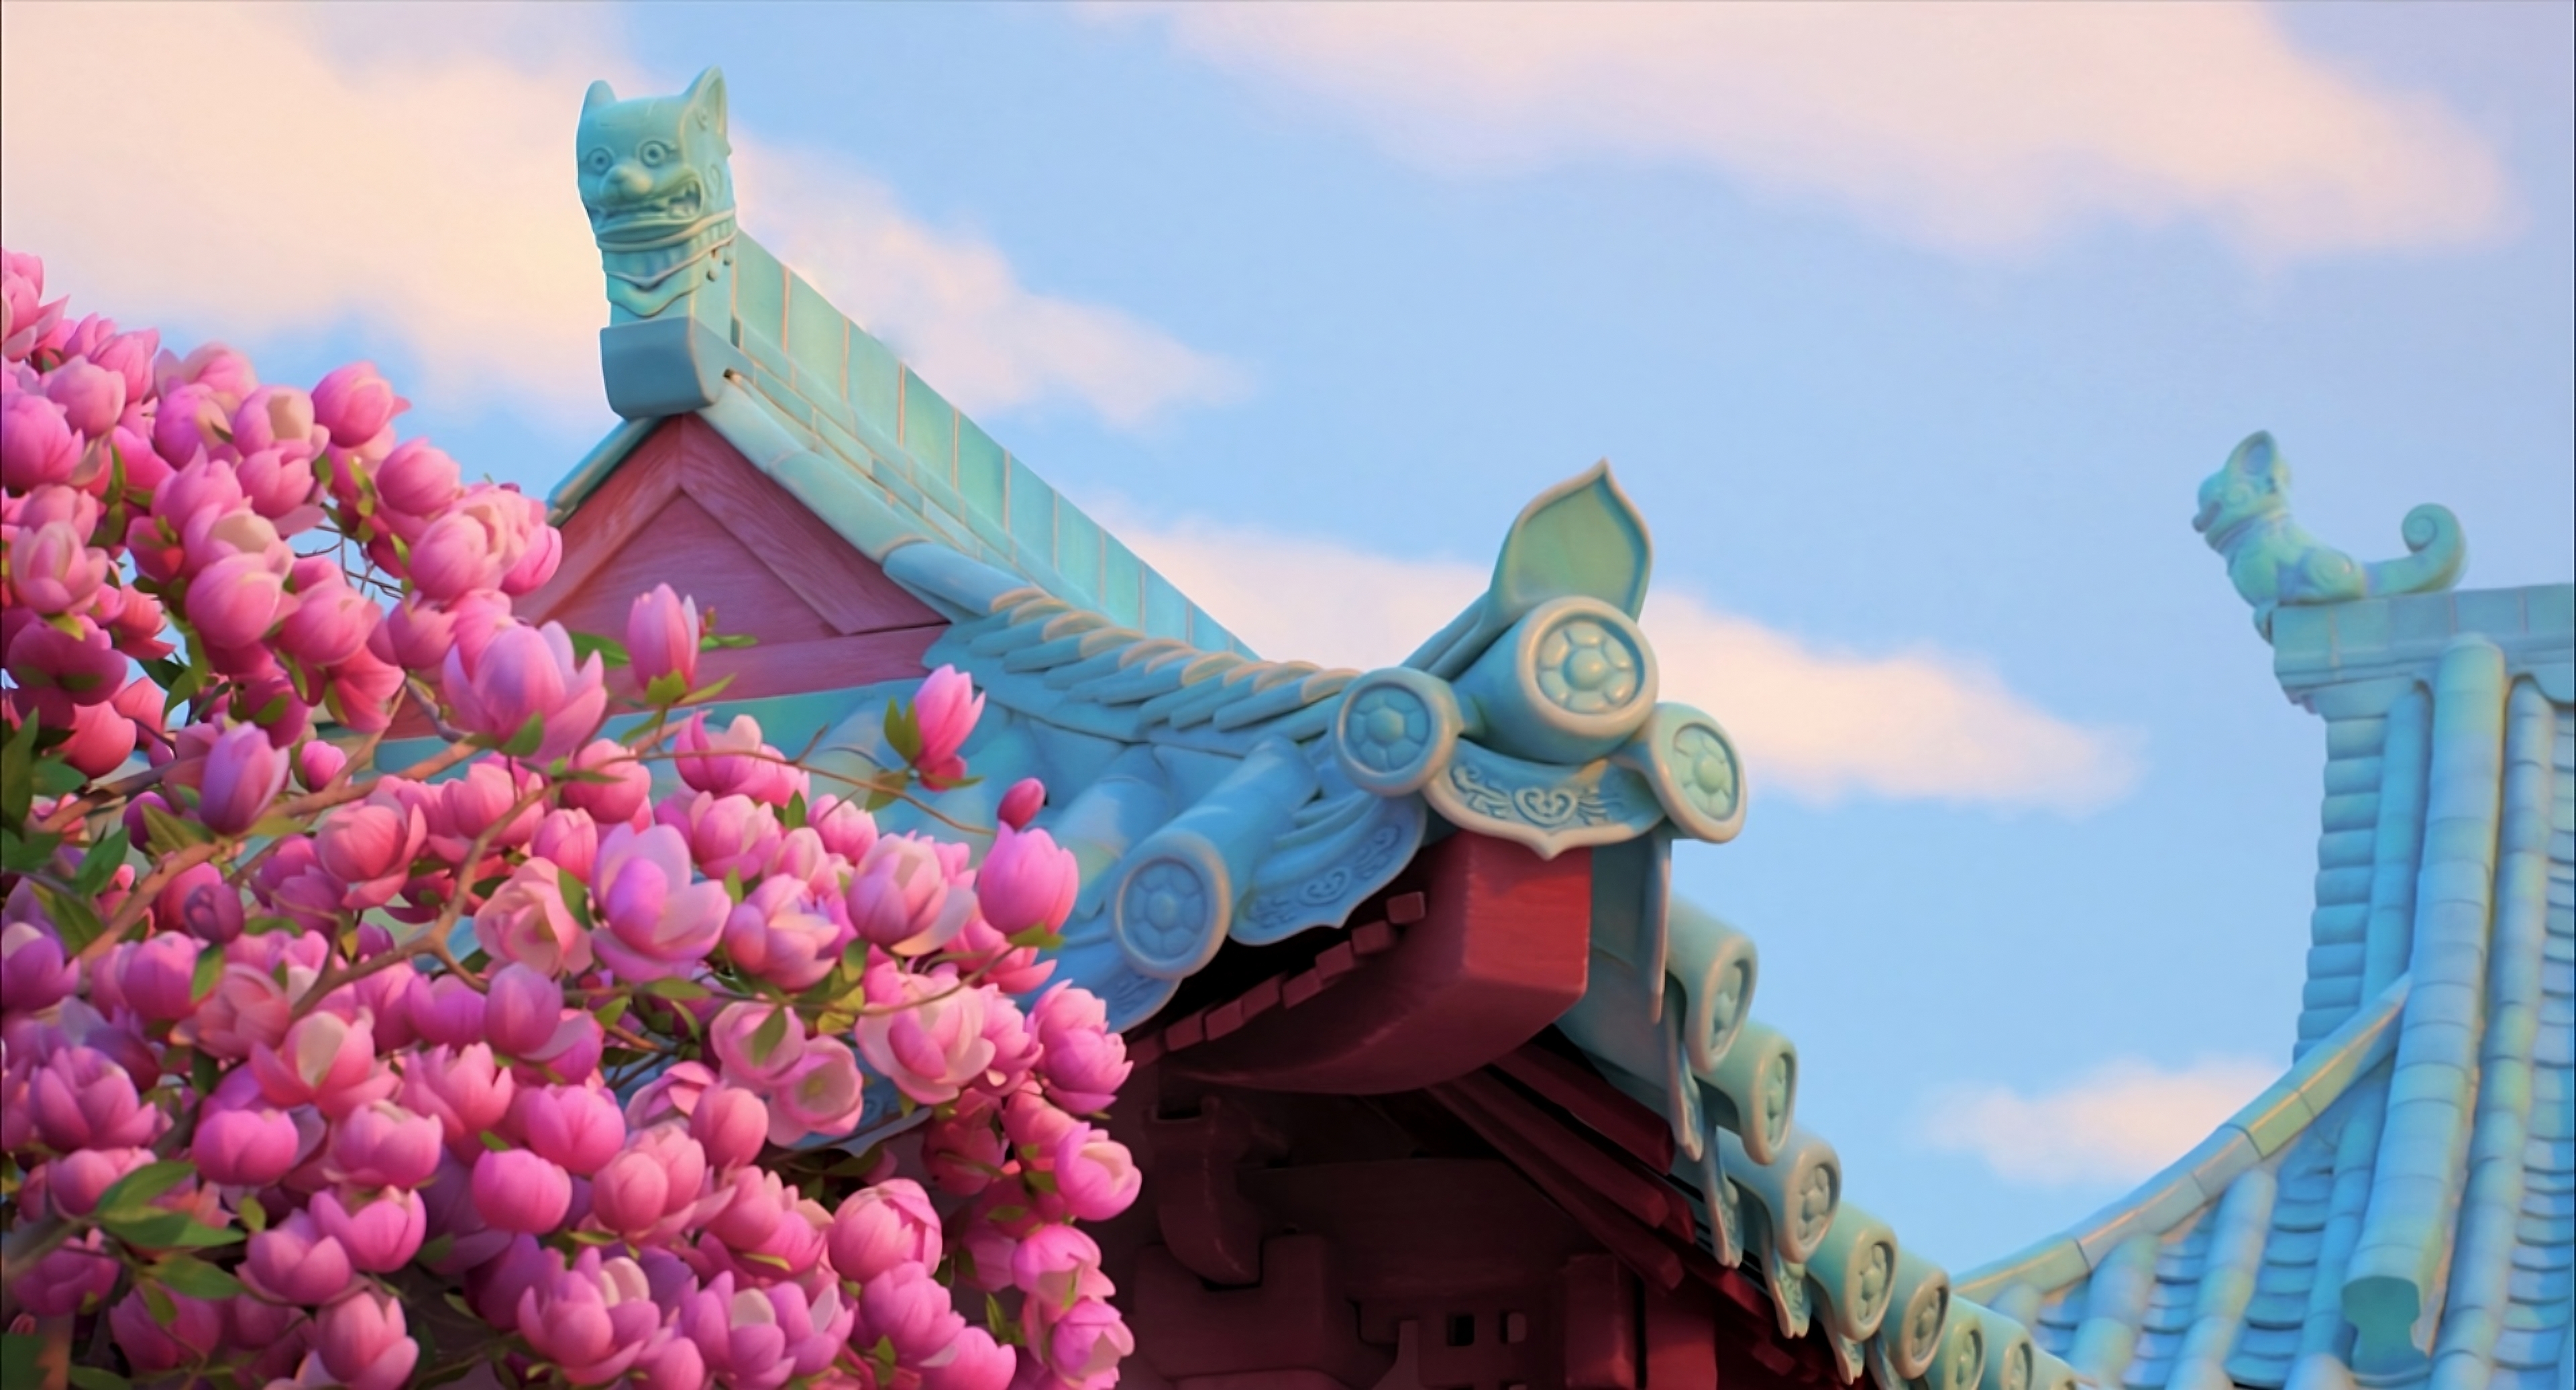 Turning Red Pixar Animation Studios Chinese Architecture Canada Toronto Animation Cherry Blossom Red 3840x2072